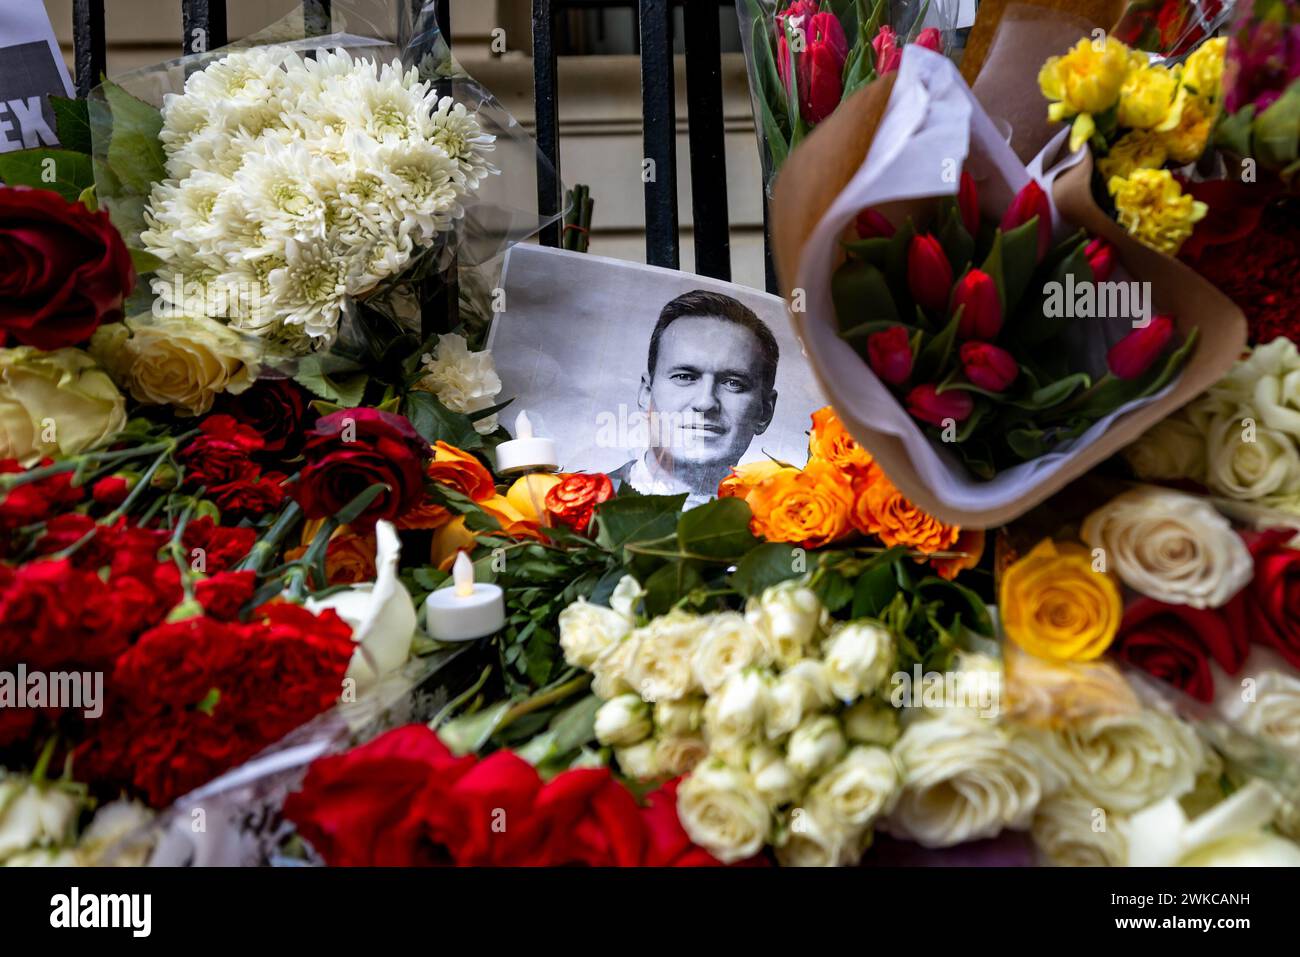 Flowers and signs are placed outside the Russian Consulate for opposition leader and Putin critic Alexei Navalny on February 16, 2024 in New York City. According to Russian state media, Navalny, the Russian politician and anti-corruption activist who became the most potent voice in opposition to President Vladimir Putin, died during a walk at the IK-3 'Arctic Wolf' penal colony where he was serving a 30 year sentence. (Photo by Michael Nigro/Pacific Press) Credit: Pacific Press Media Production Corp./Alamy Live News Stock Photo